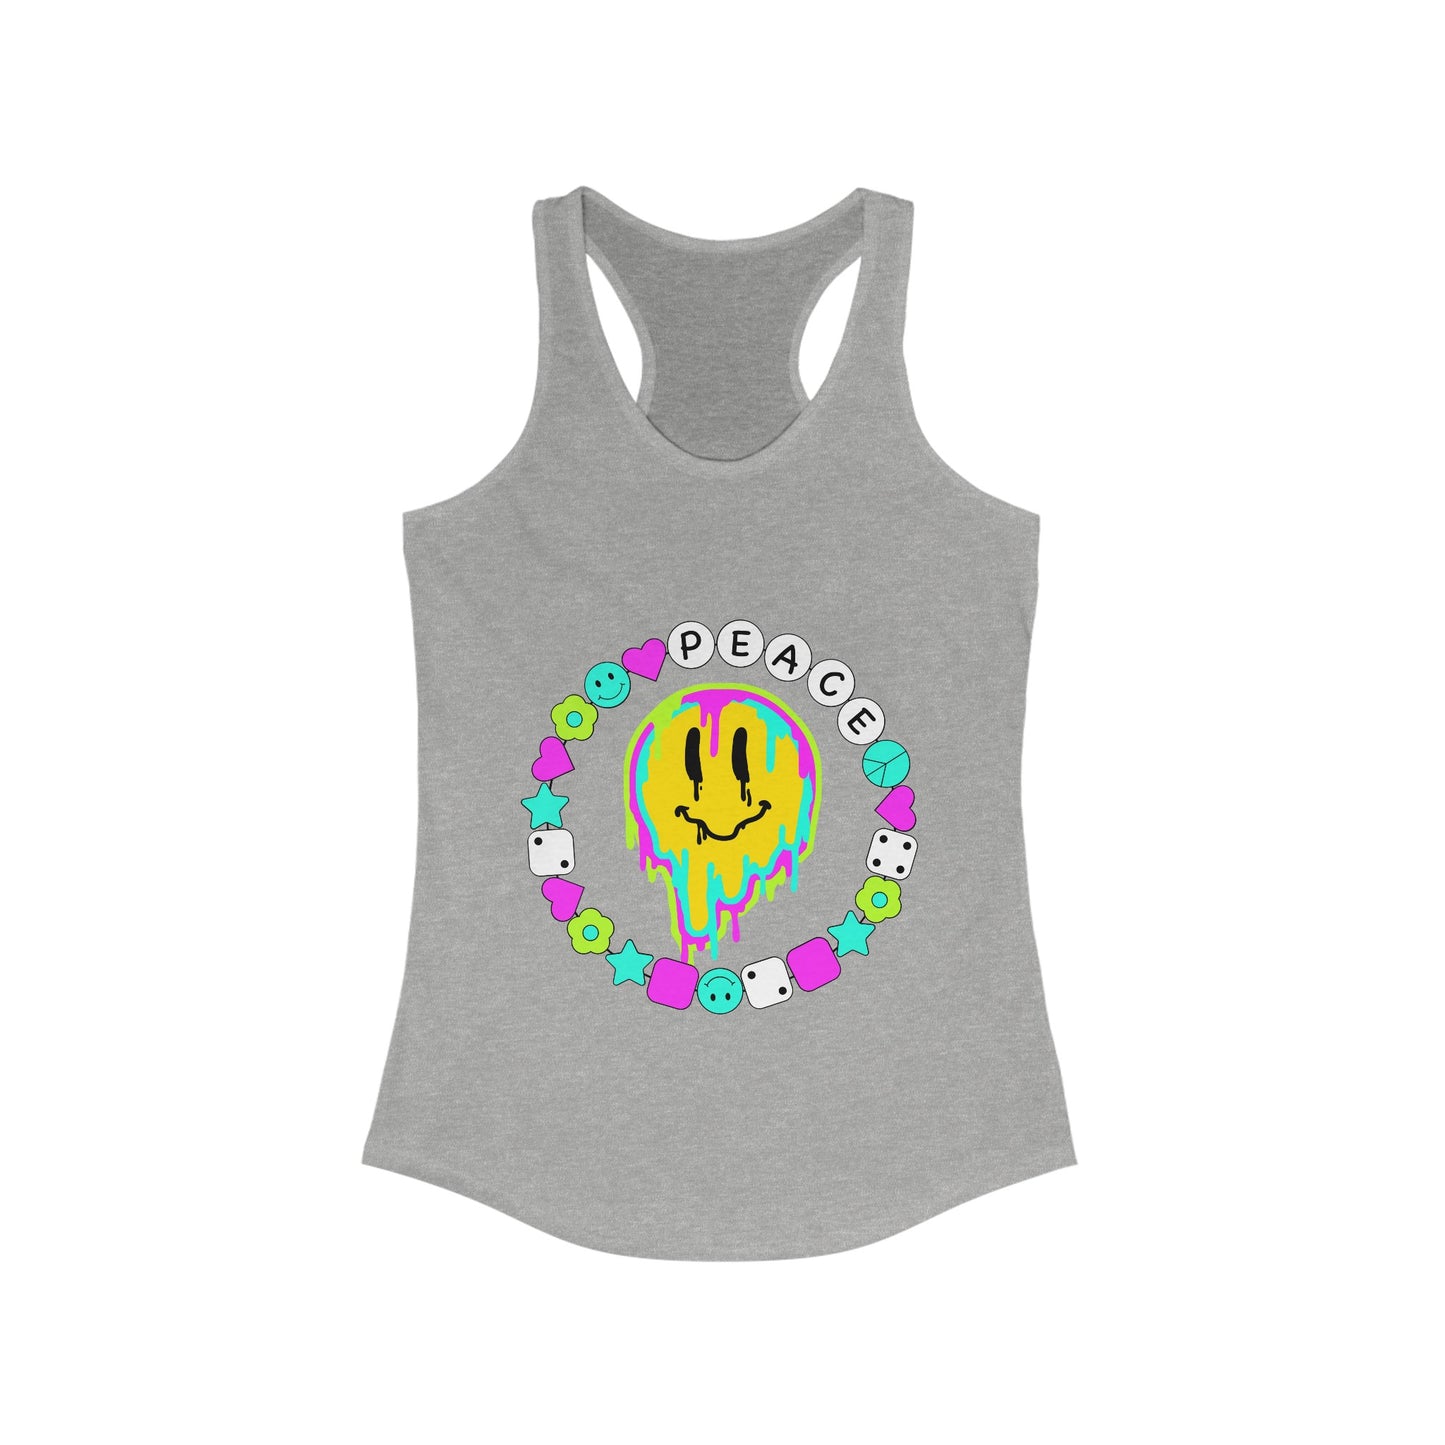 Peace & Happiness Neon Smiley Face Women's Racerback Slim Fit Tank Top Sizes xs-2xl